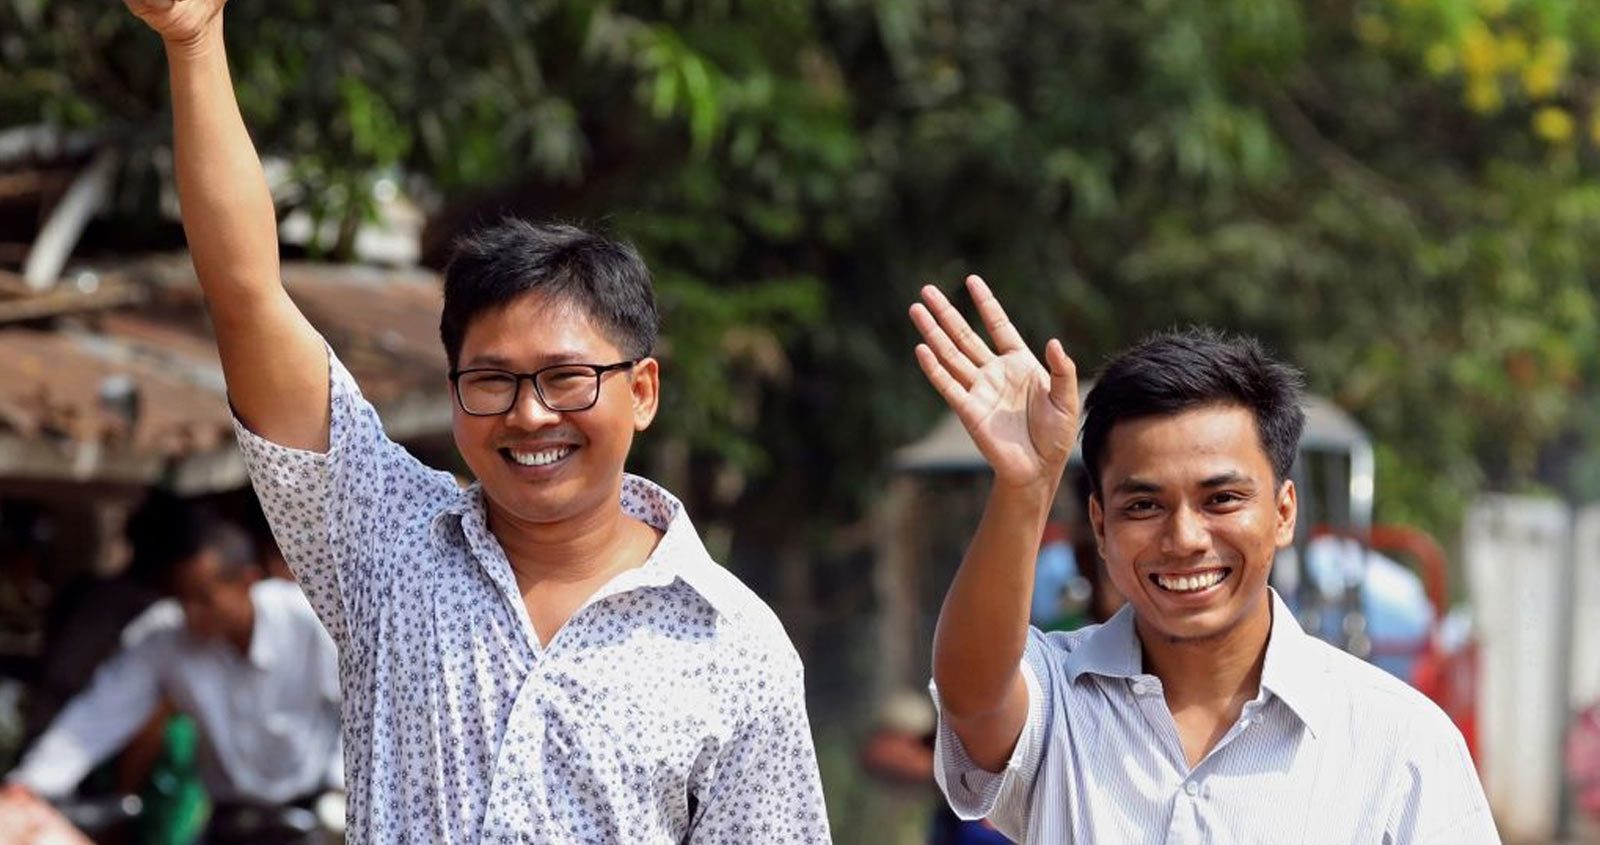 Wa Lone and Kyaw Soe Oo smile widely and wave. Wa Lone has his hand raised in the air in a thumbs up.